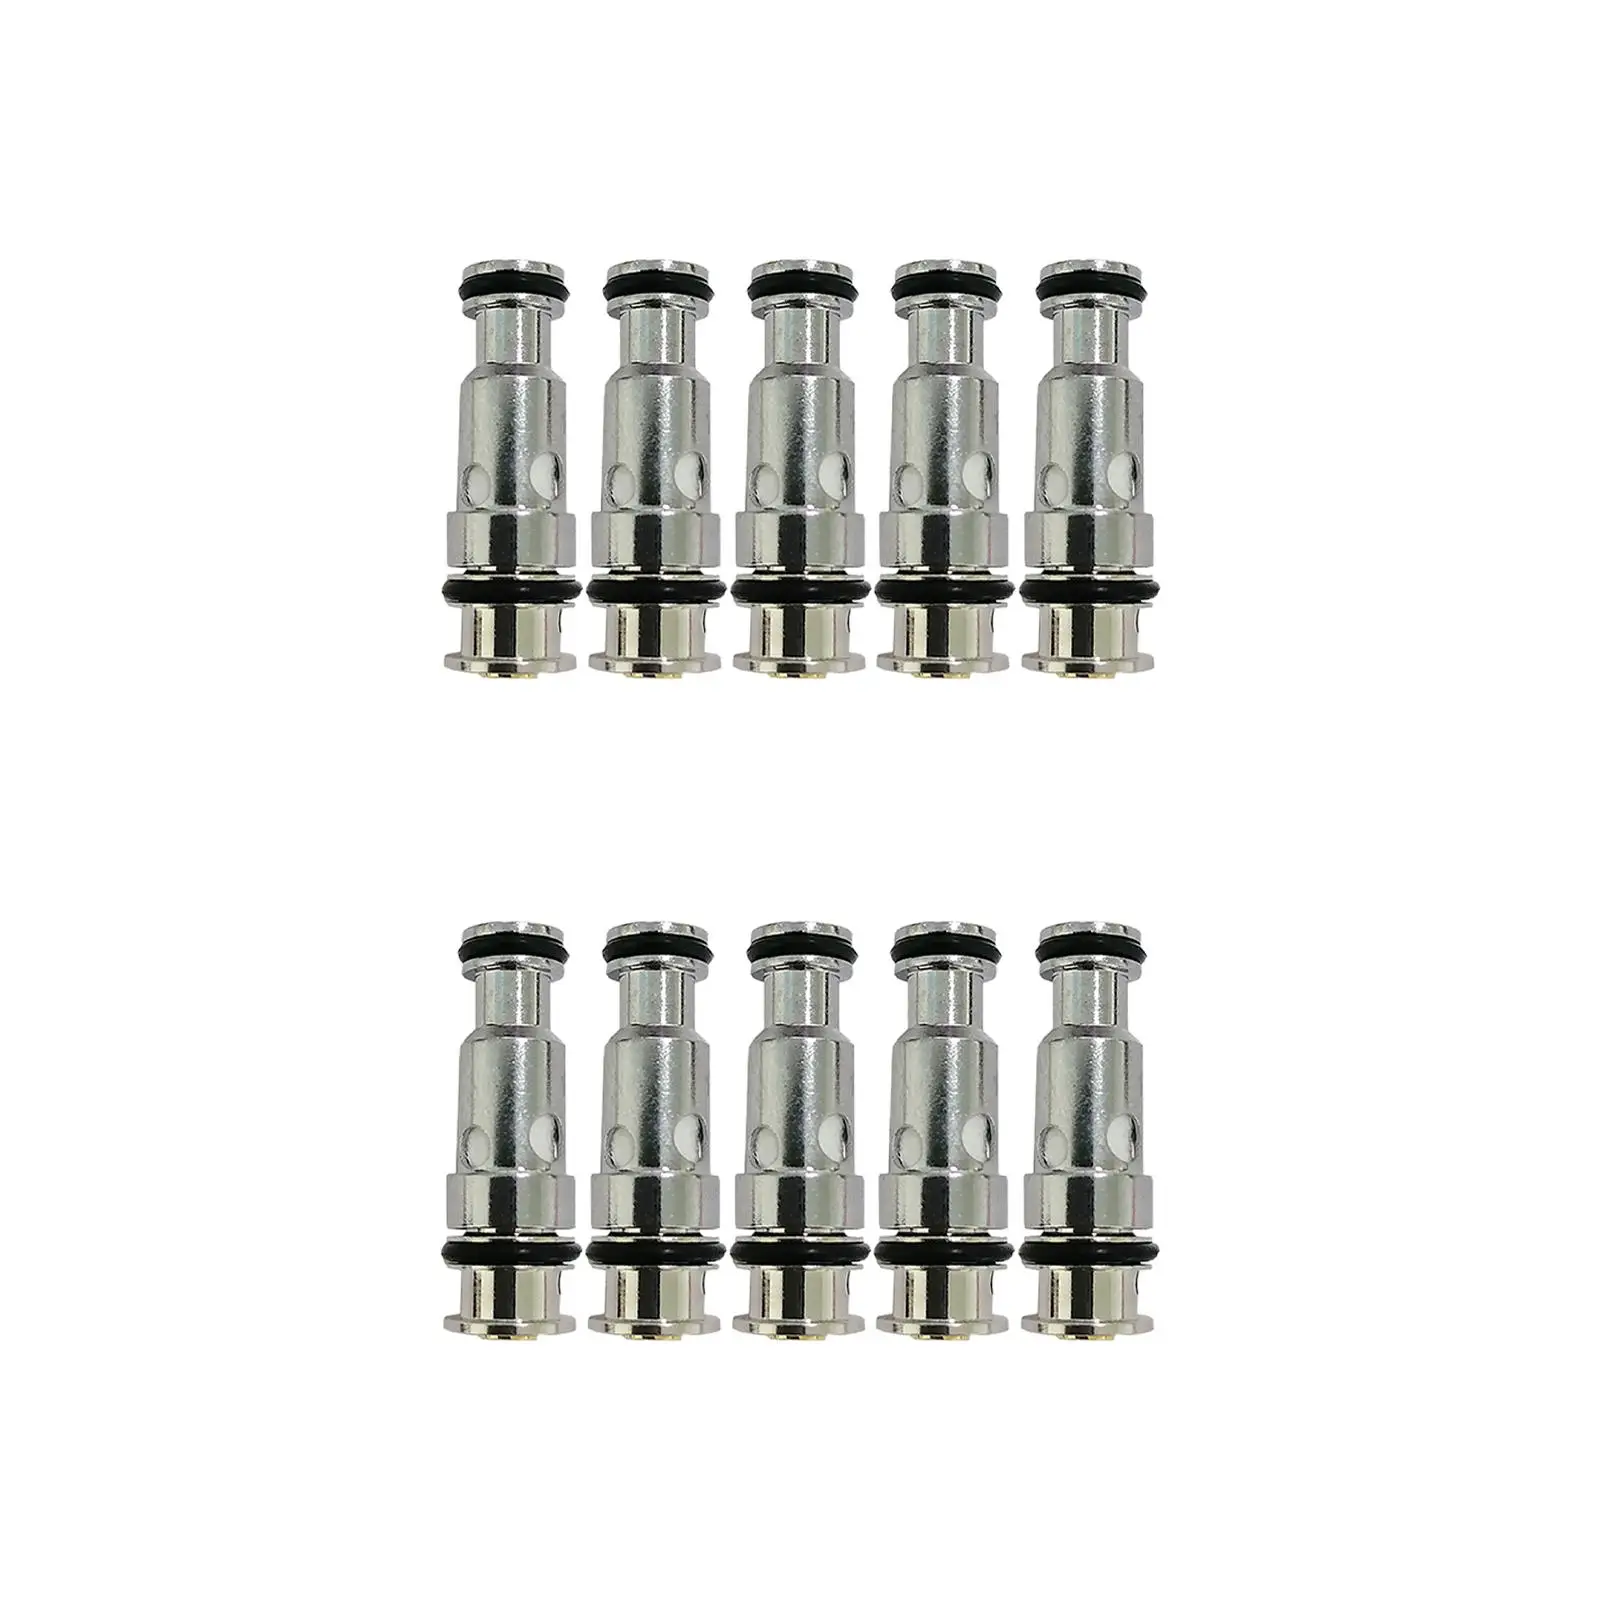 Set of 5 PNP Coils Head Plug in Play Stainless Steel Easy Use Durable for Argus Air 857 Accs Parts